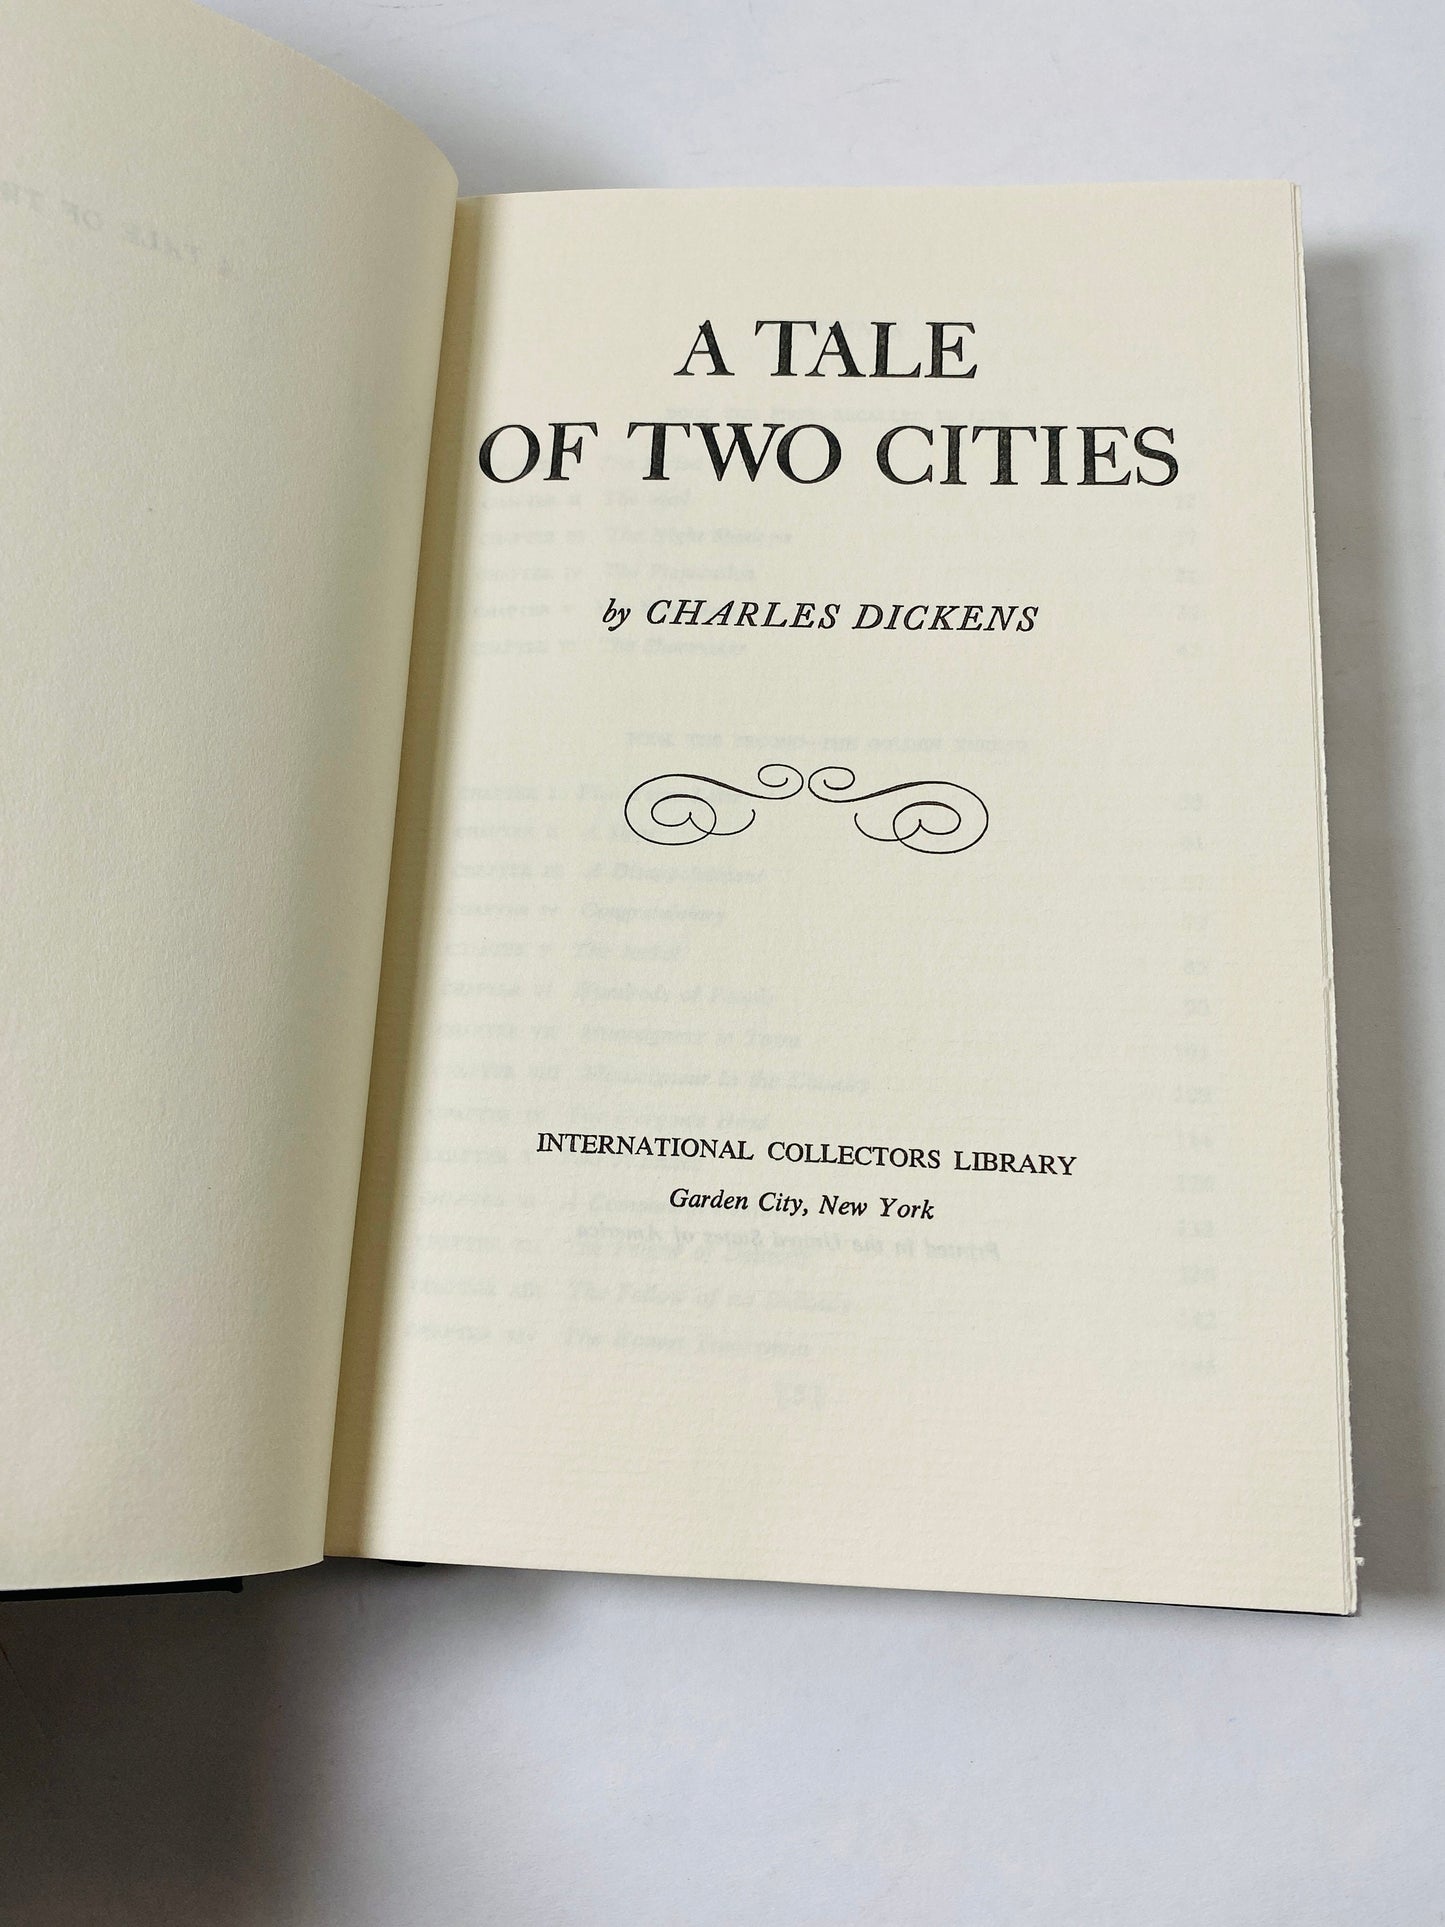 A Tale of Two Cities by Charles Dickens vintage green book with gold gilt lettering. French Revolution.